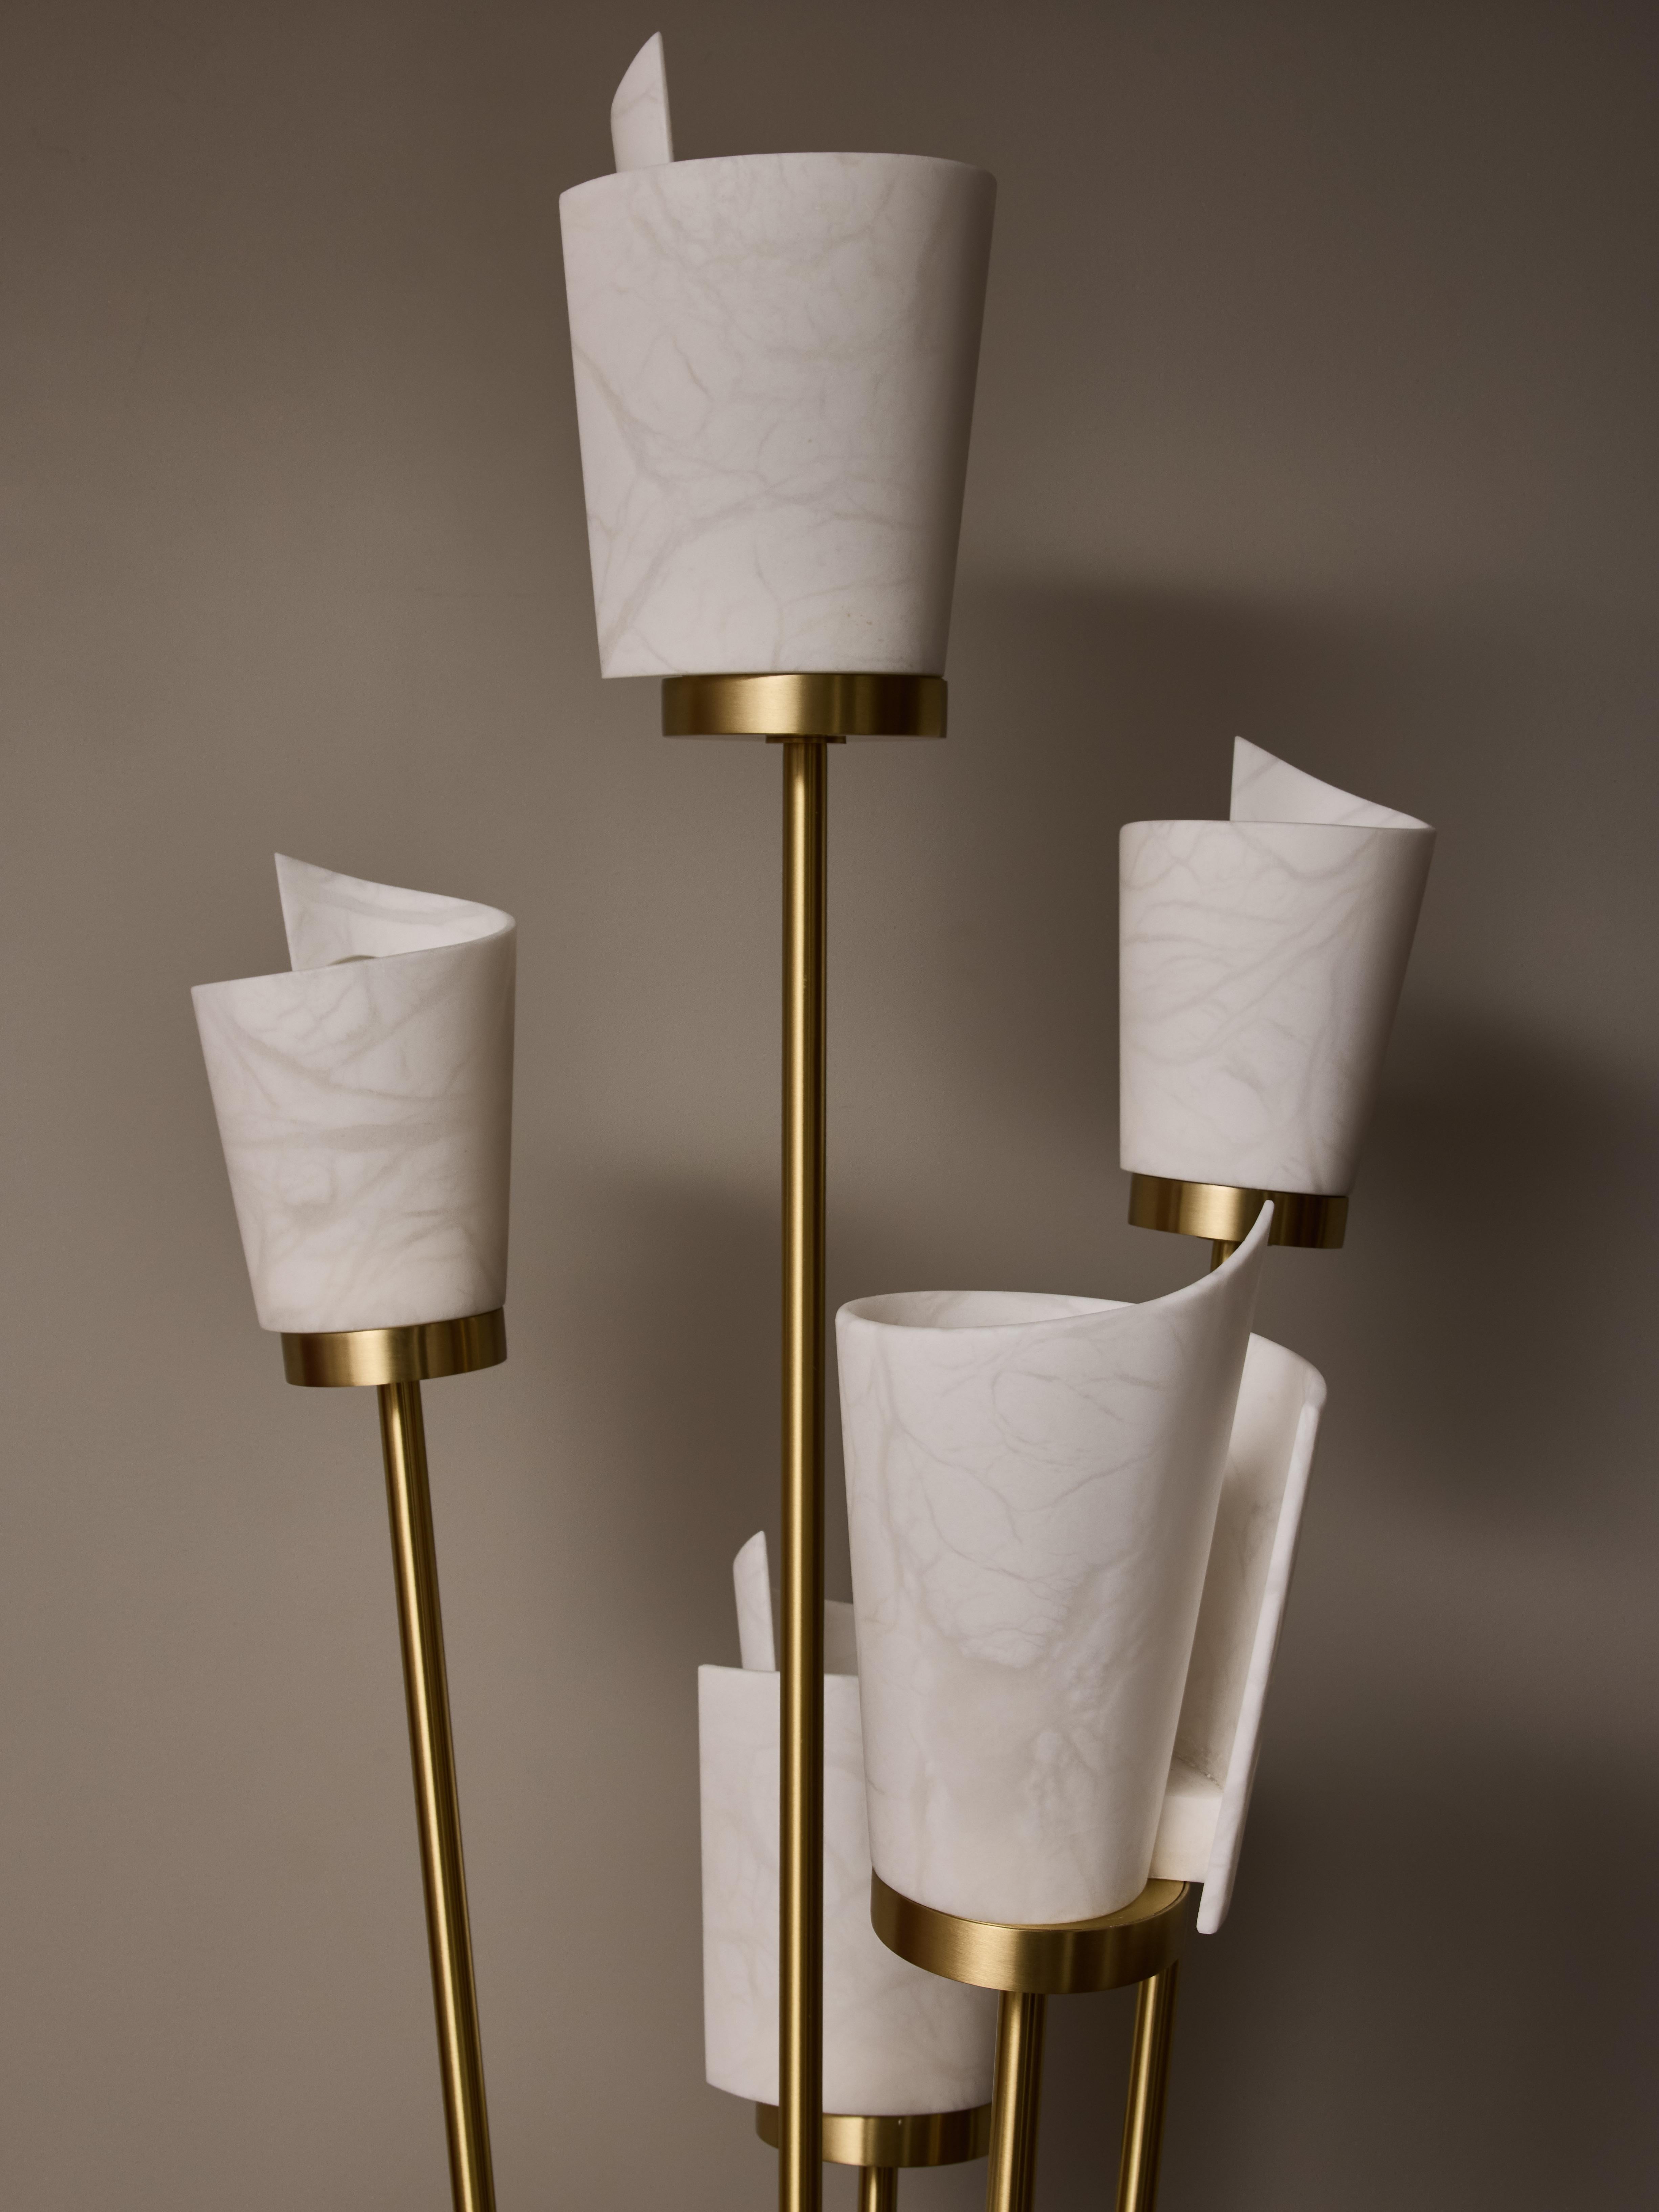 Italian Satinated Brass and Alabaster Spiral Shades Six Arms of Light Floor Lamp For Sale